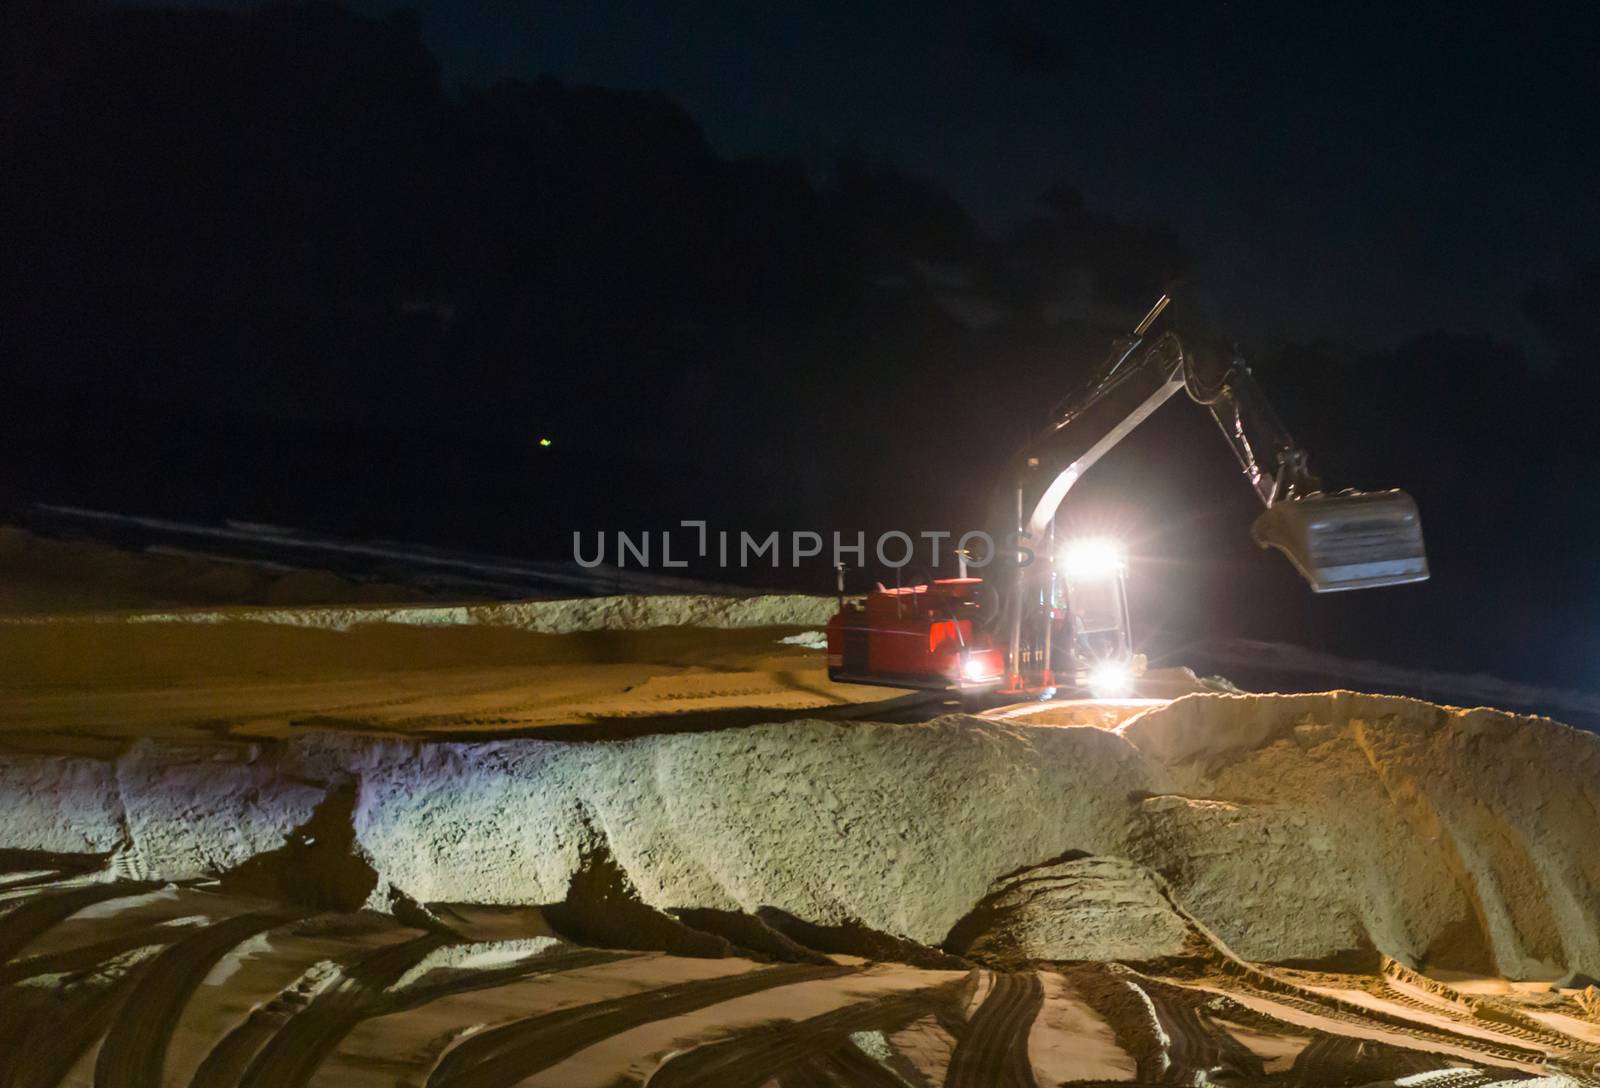 digger excavator working at night time moving the ground at the beach for maintenance